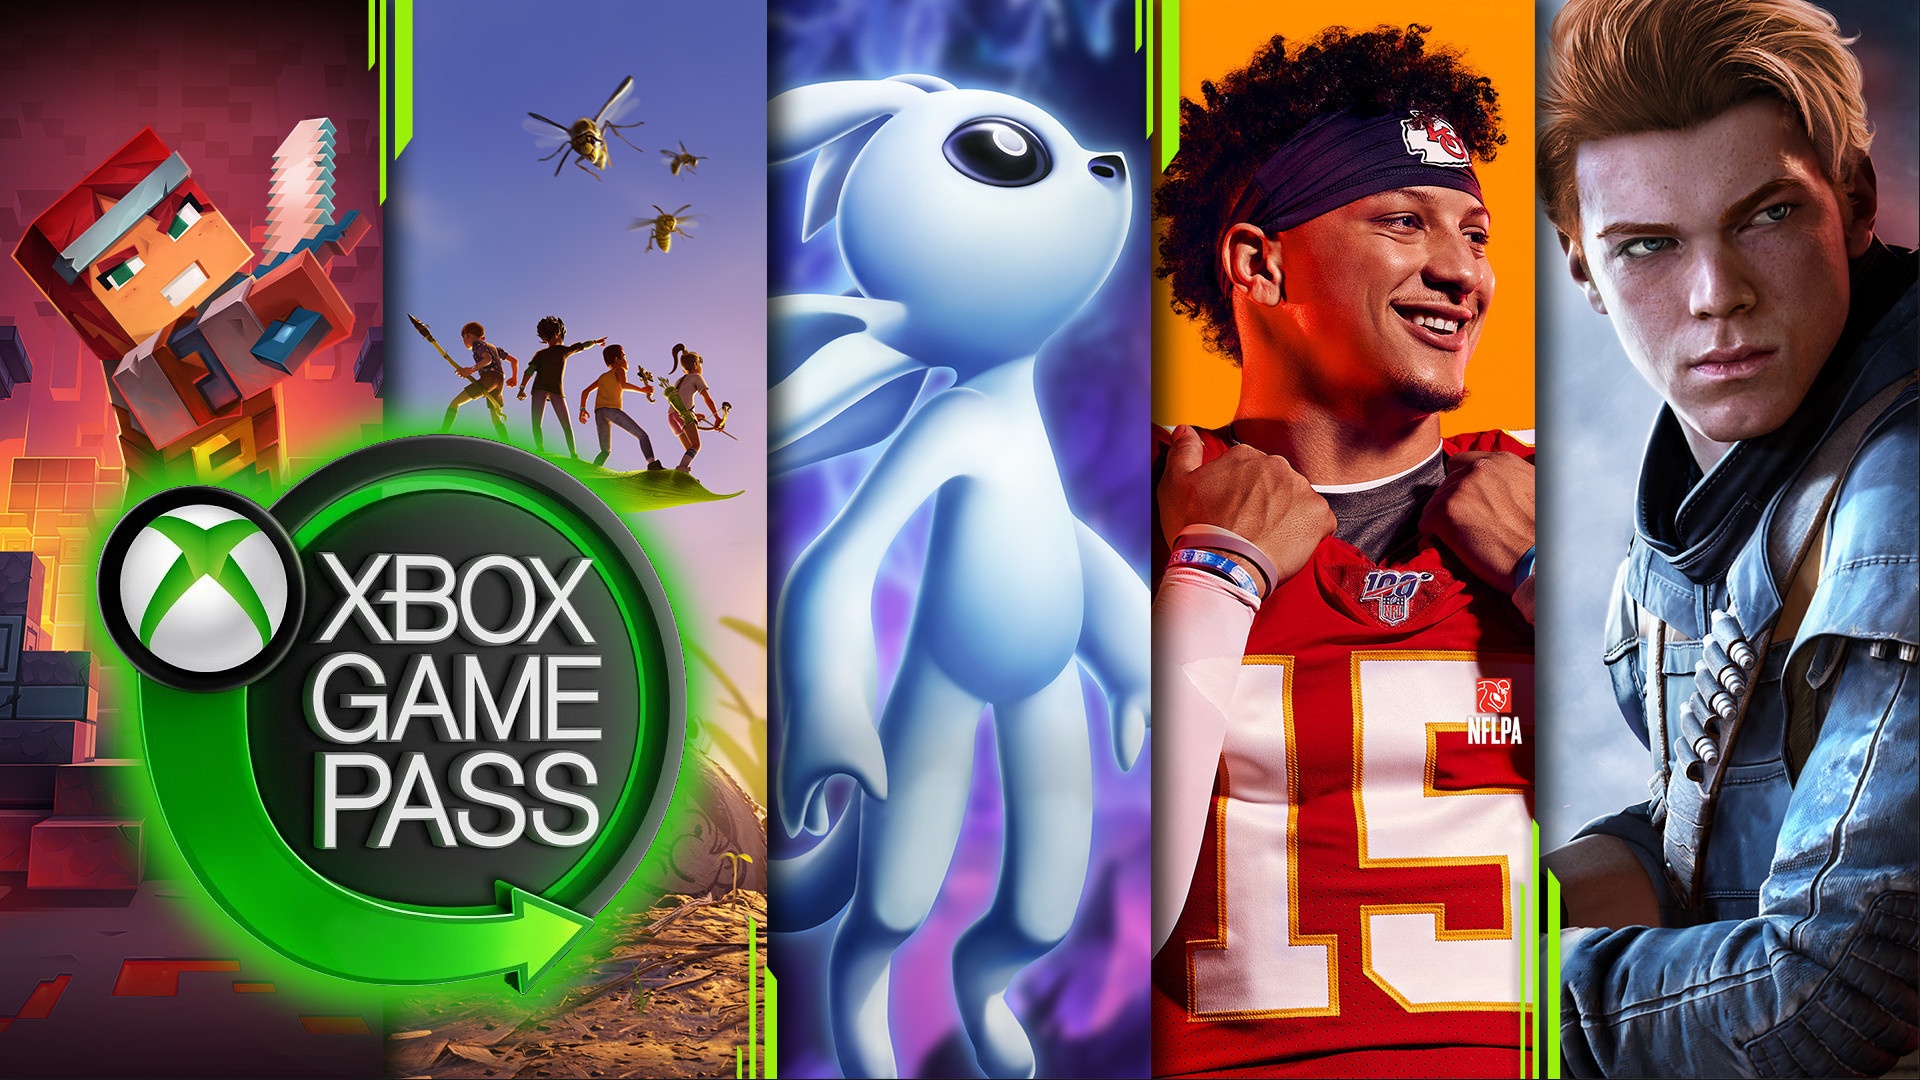 xbox ultimate game pass £1